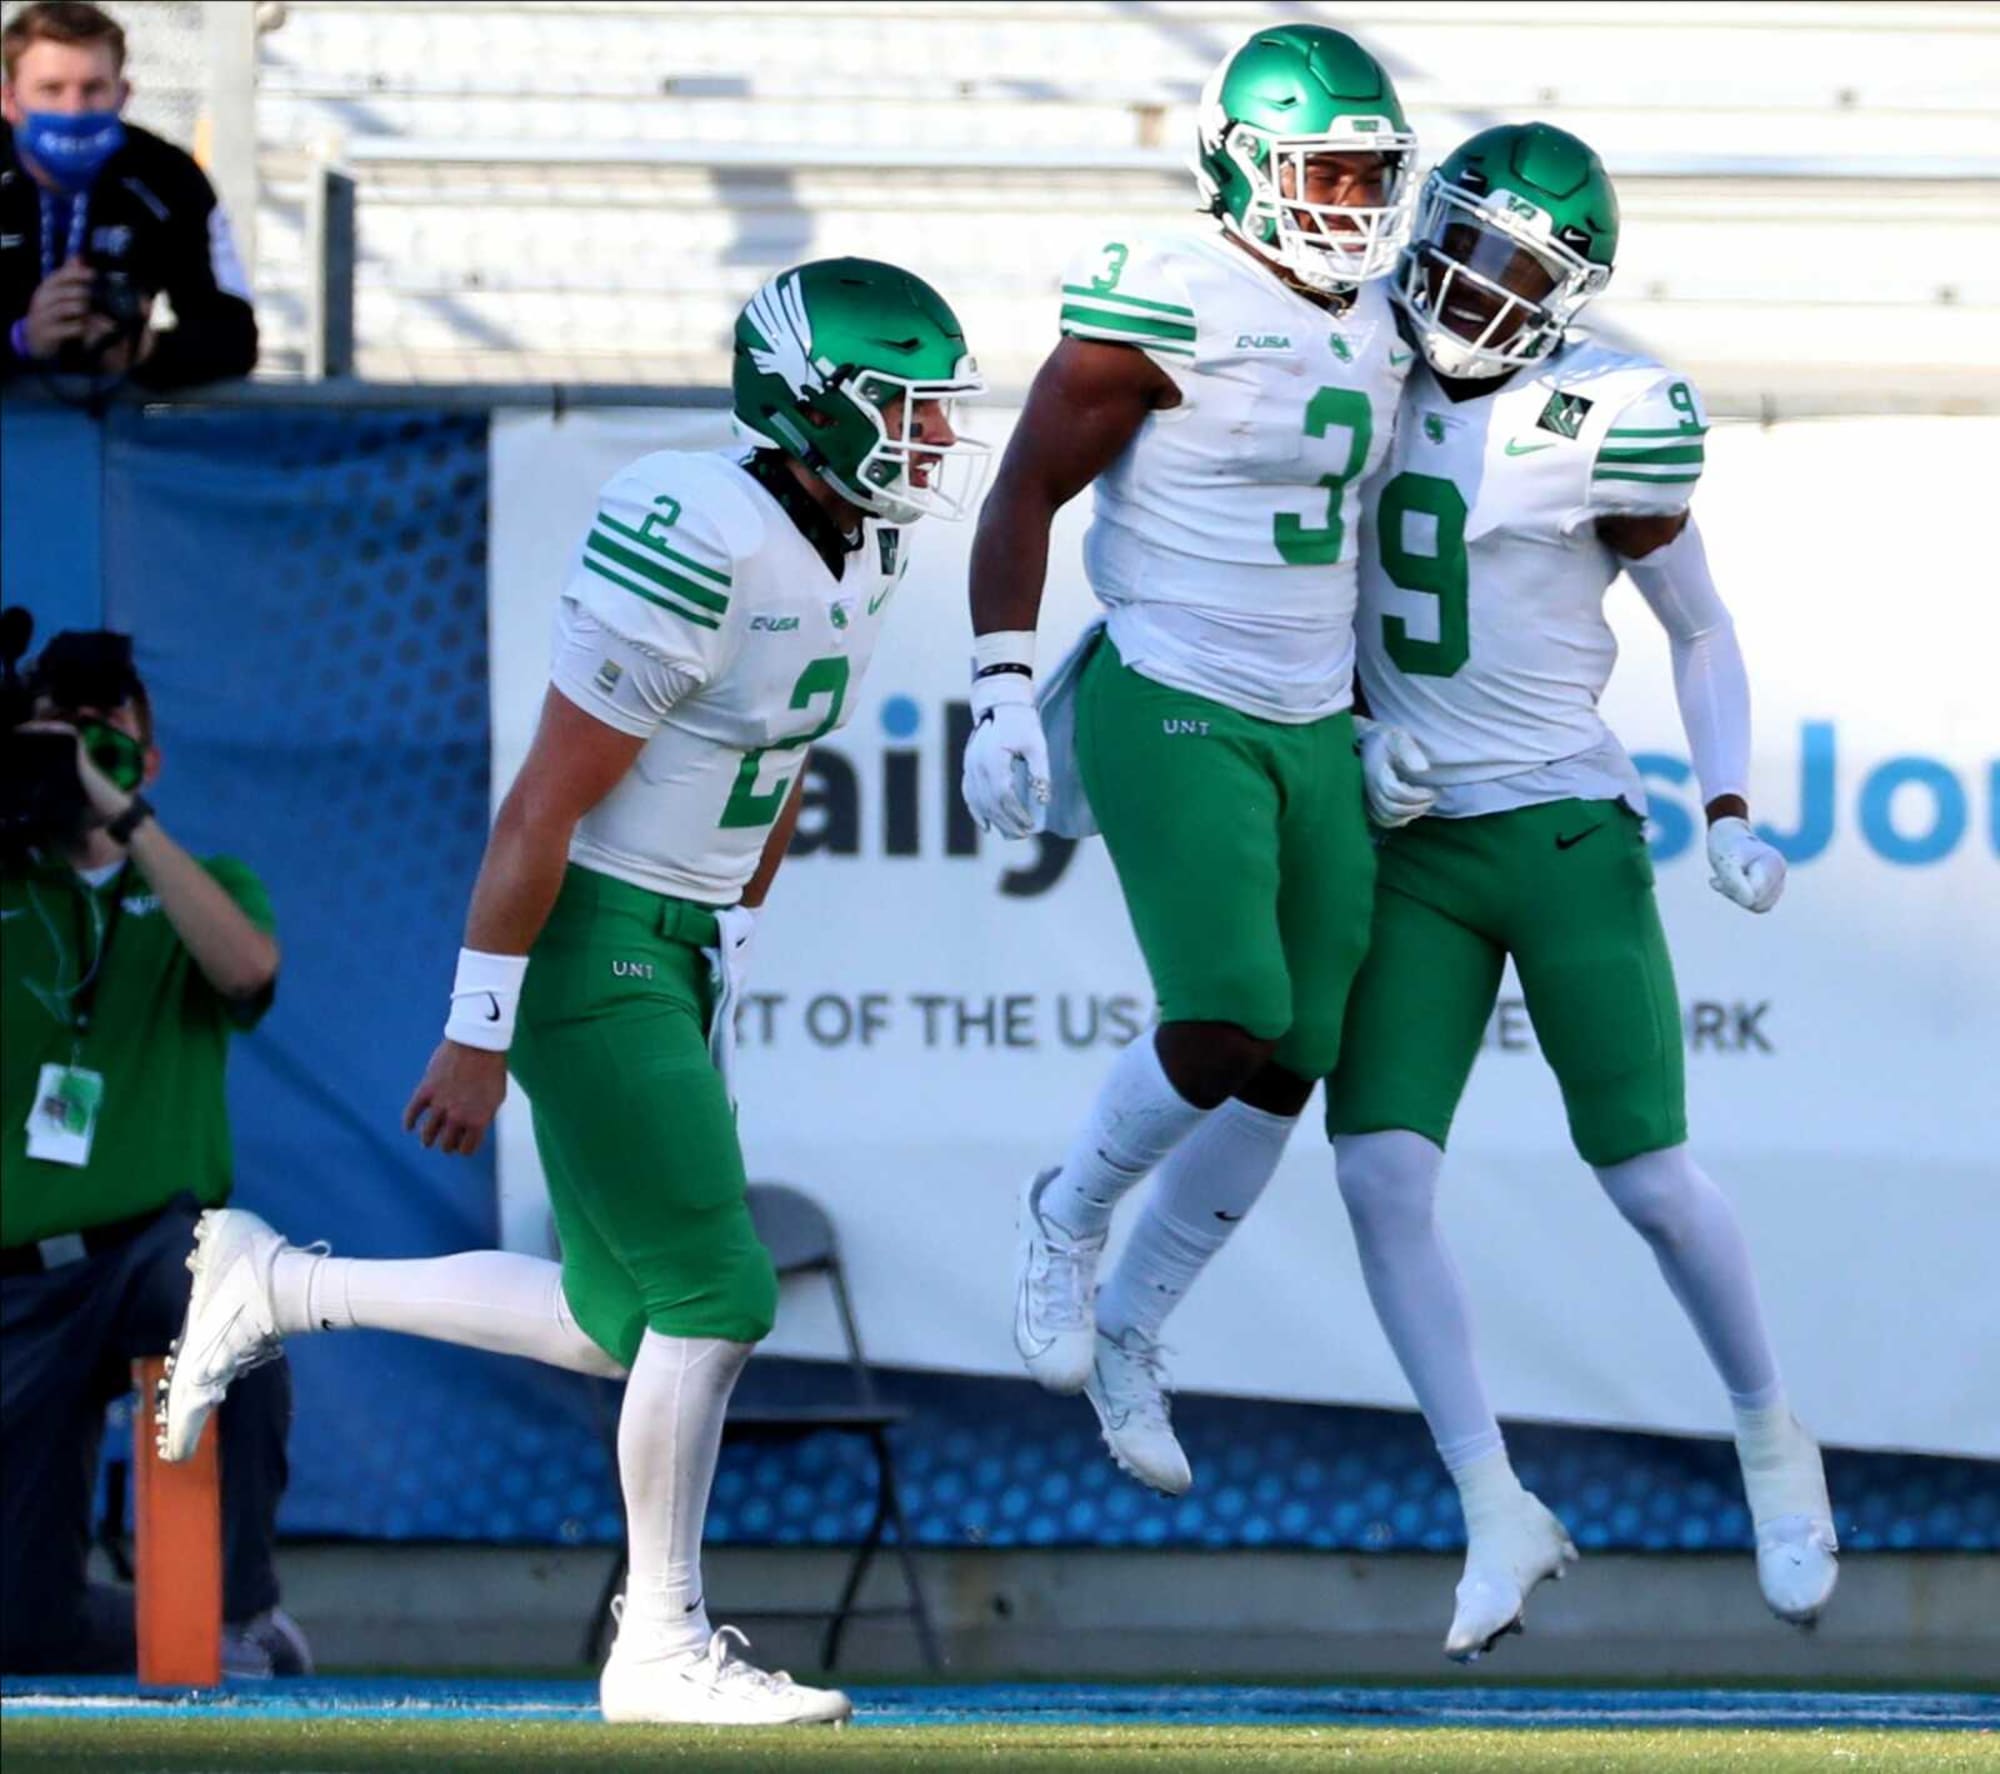 North Texas Football Mean Green a threat due to electric offense Page 2